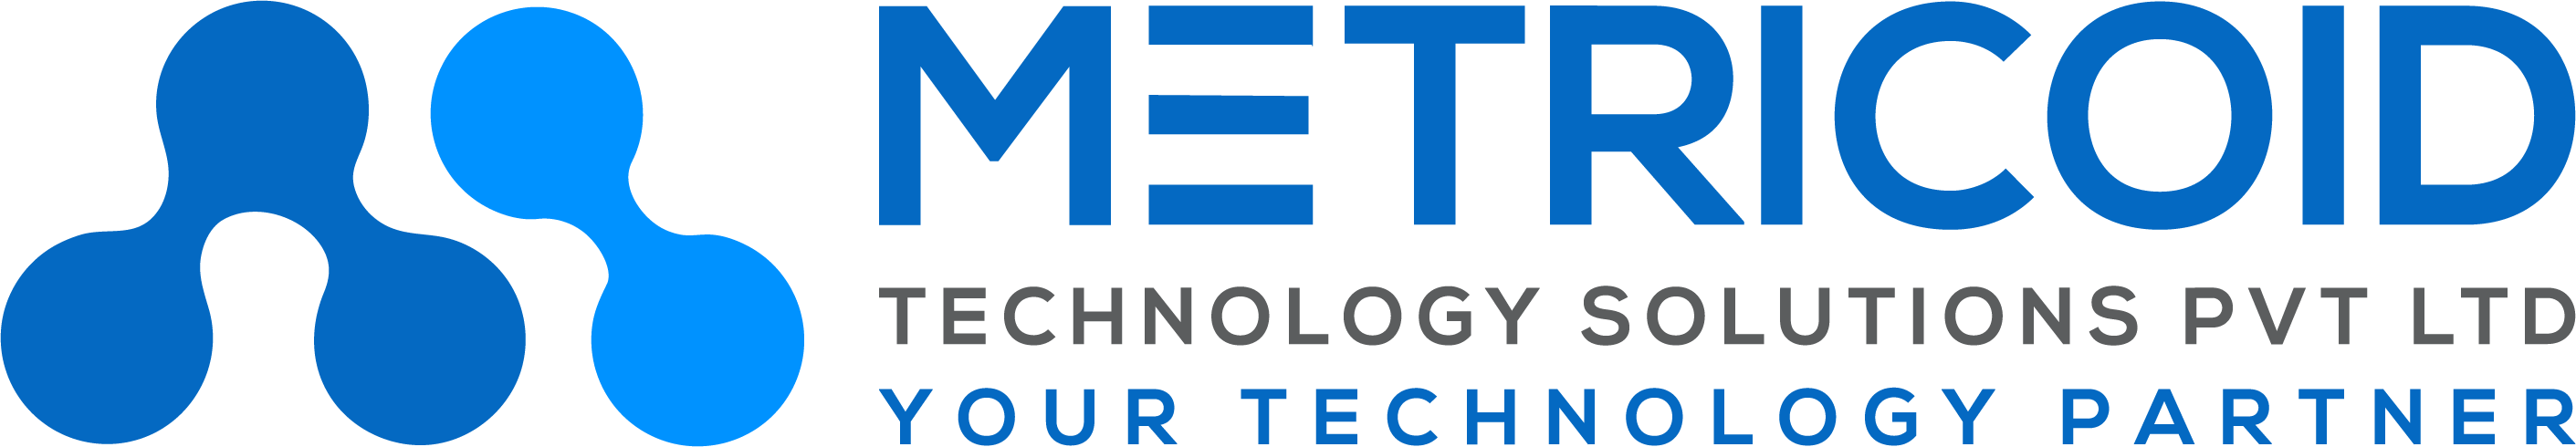 Metricoid Technology Solutions Private Limited profile on Qualified.One